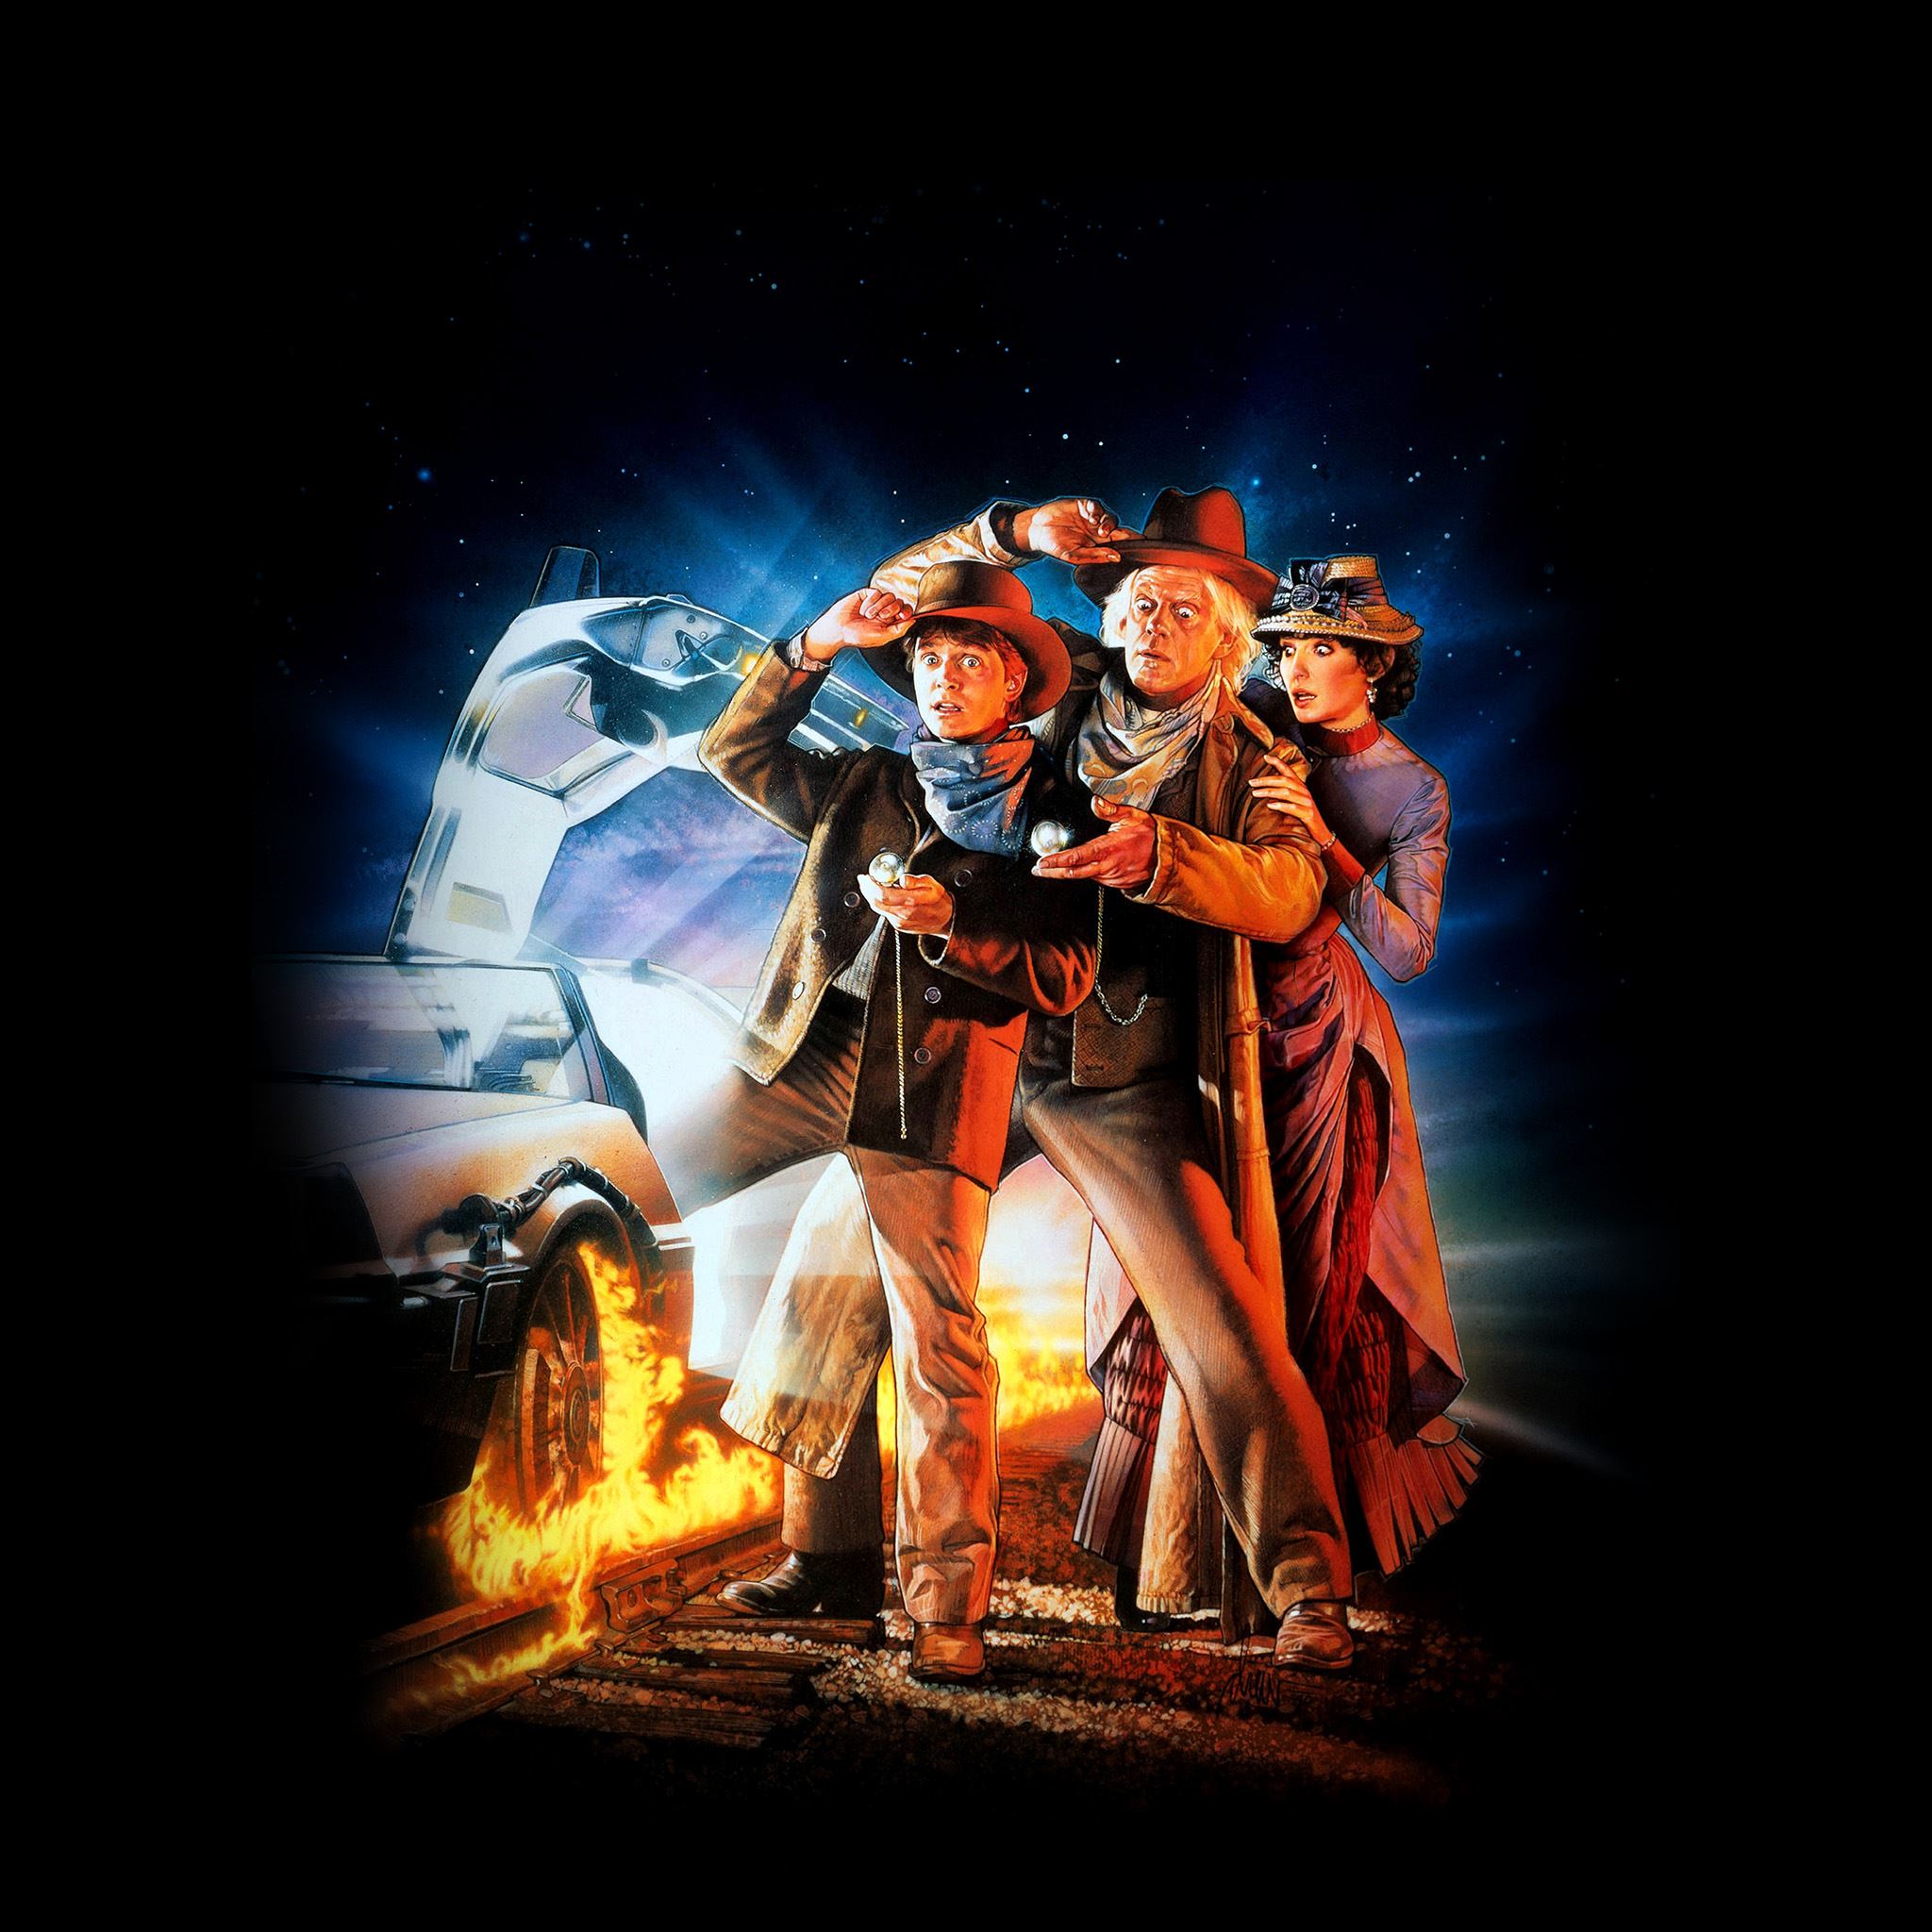 Back To The Future 3 Poster Film Art iPad Air Wallpaper Free Download